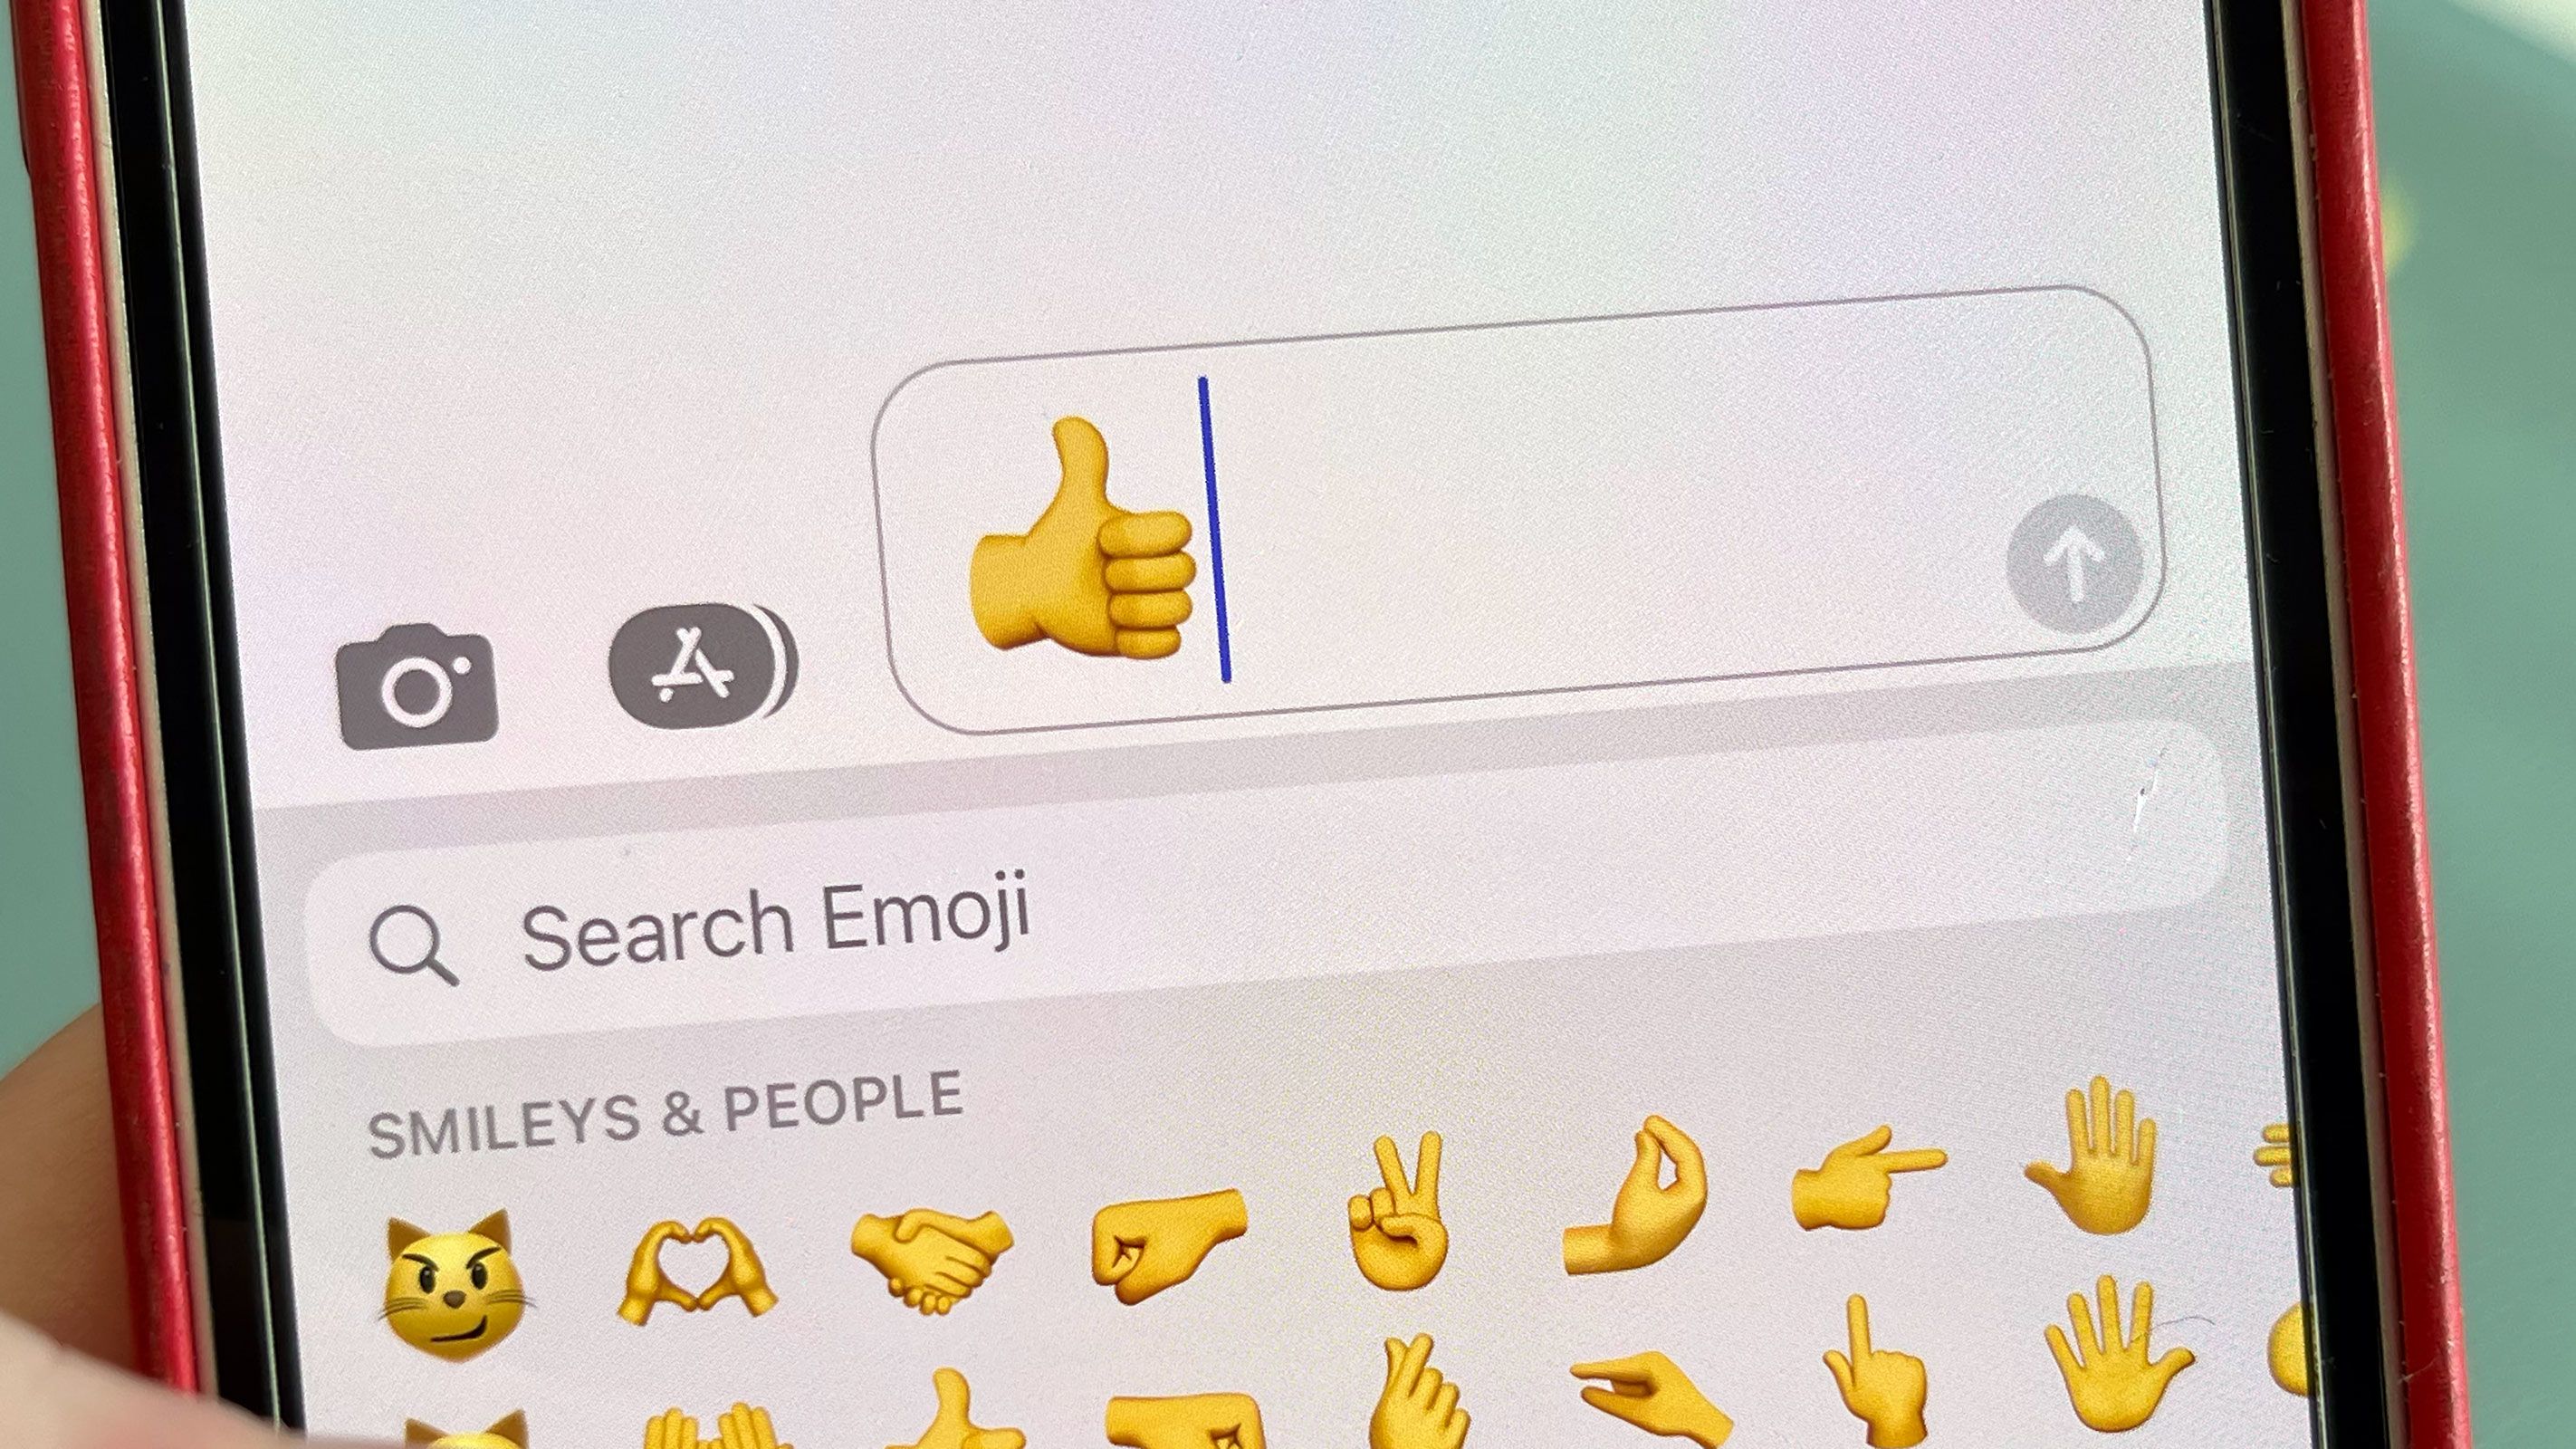 This Company Got Sued After Sending A Thumbs Up Emoji, How Come?